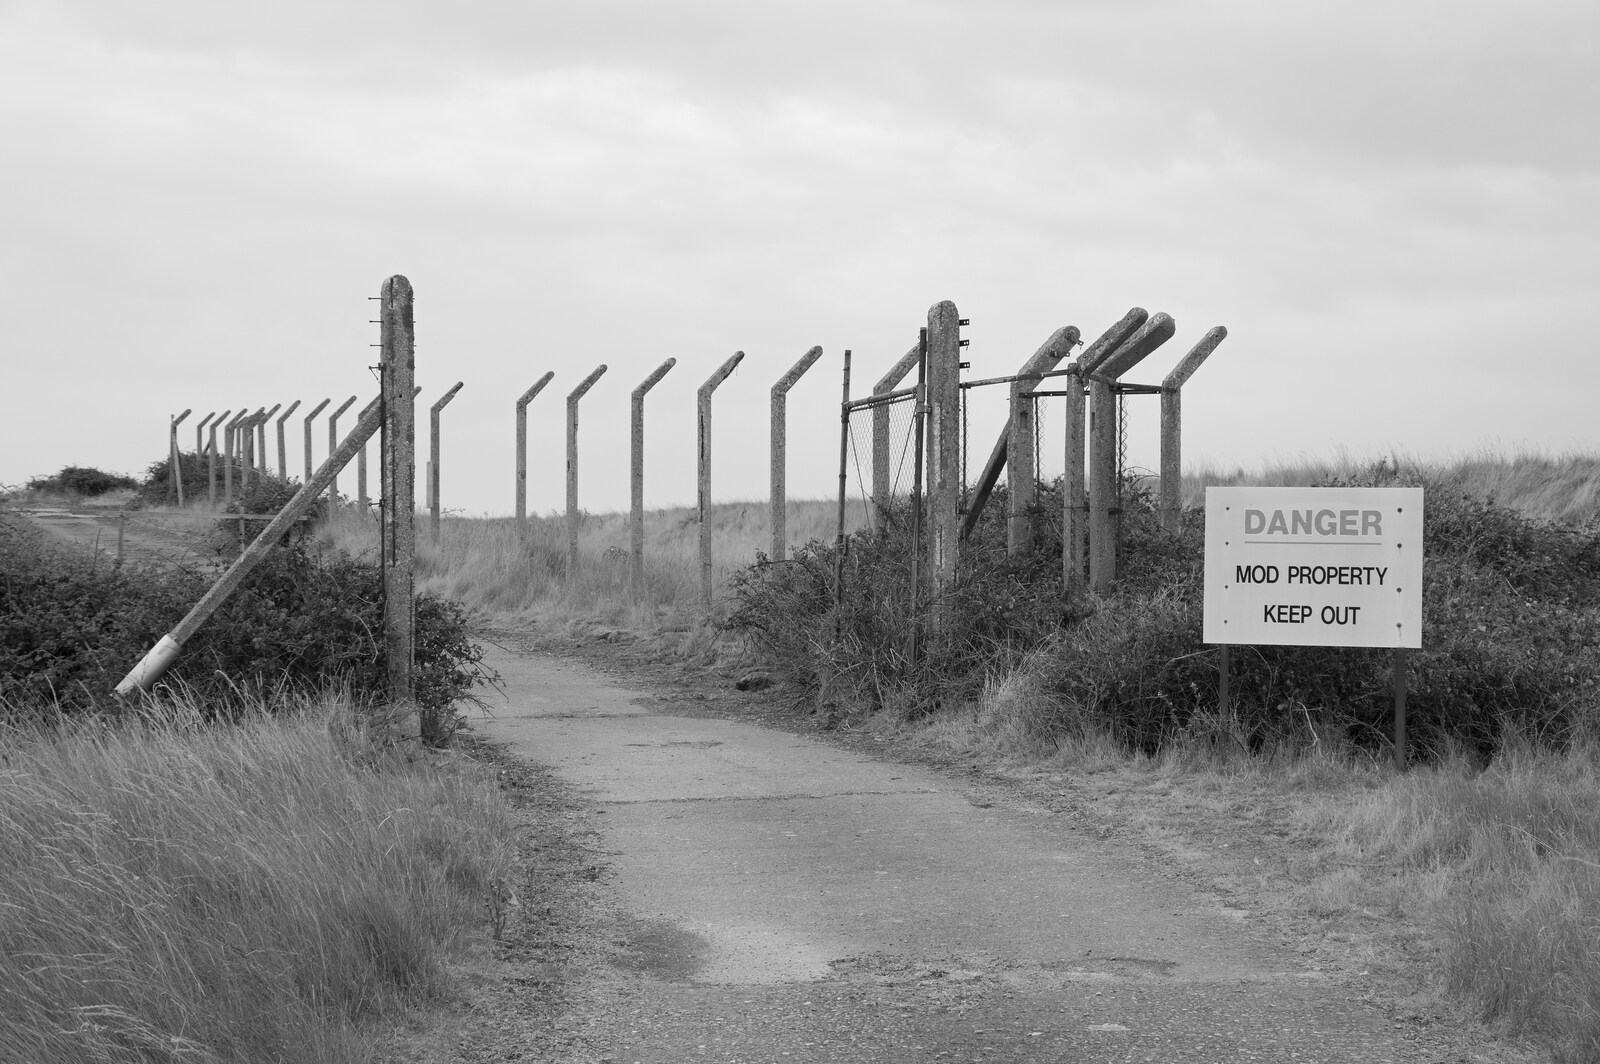 The remains of an MOD fence from A Trip to Orford Ness, Orford, Suffolk - 16th August 2022